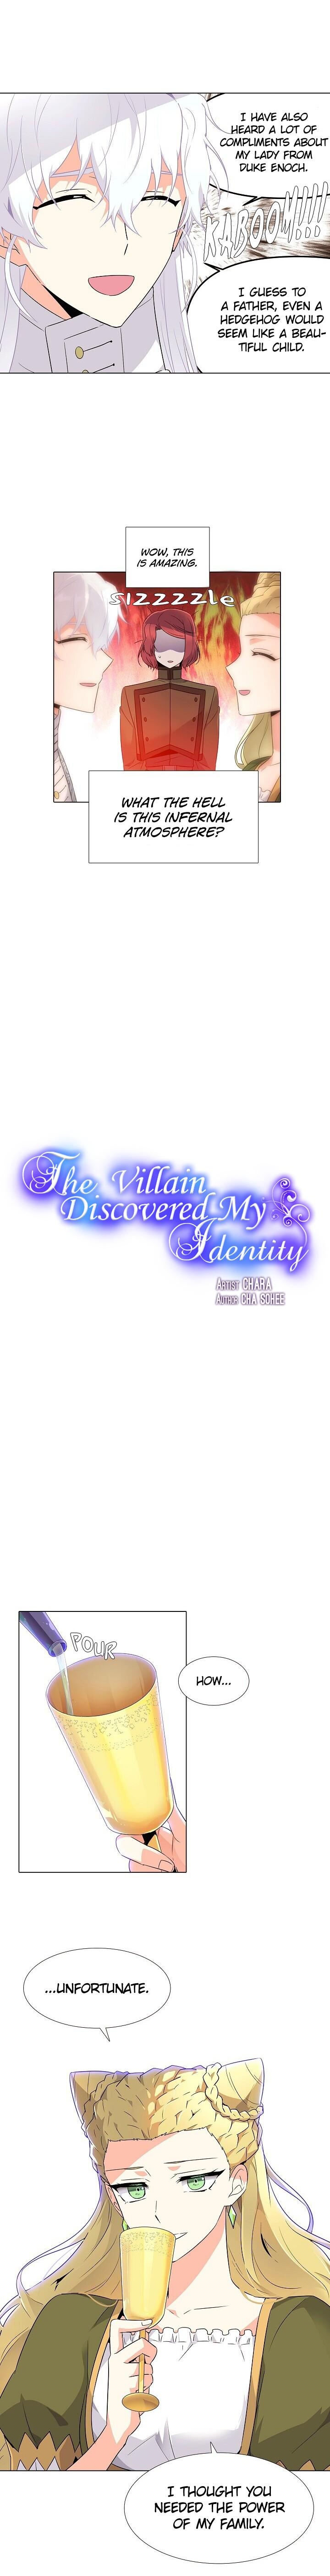 The Villain Discovered My Identity - Chapter 17 Page 6